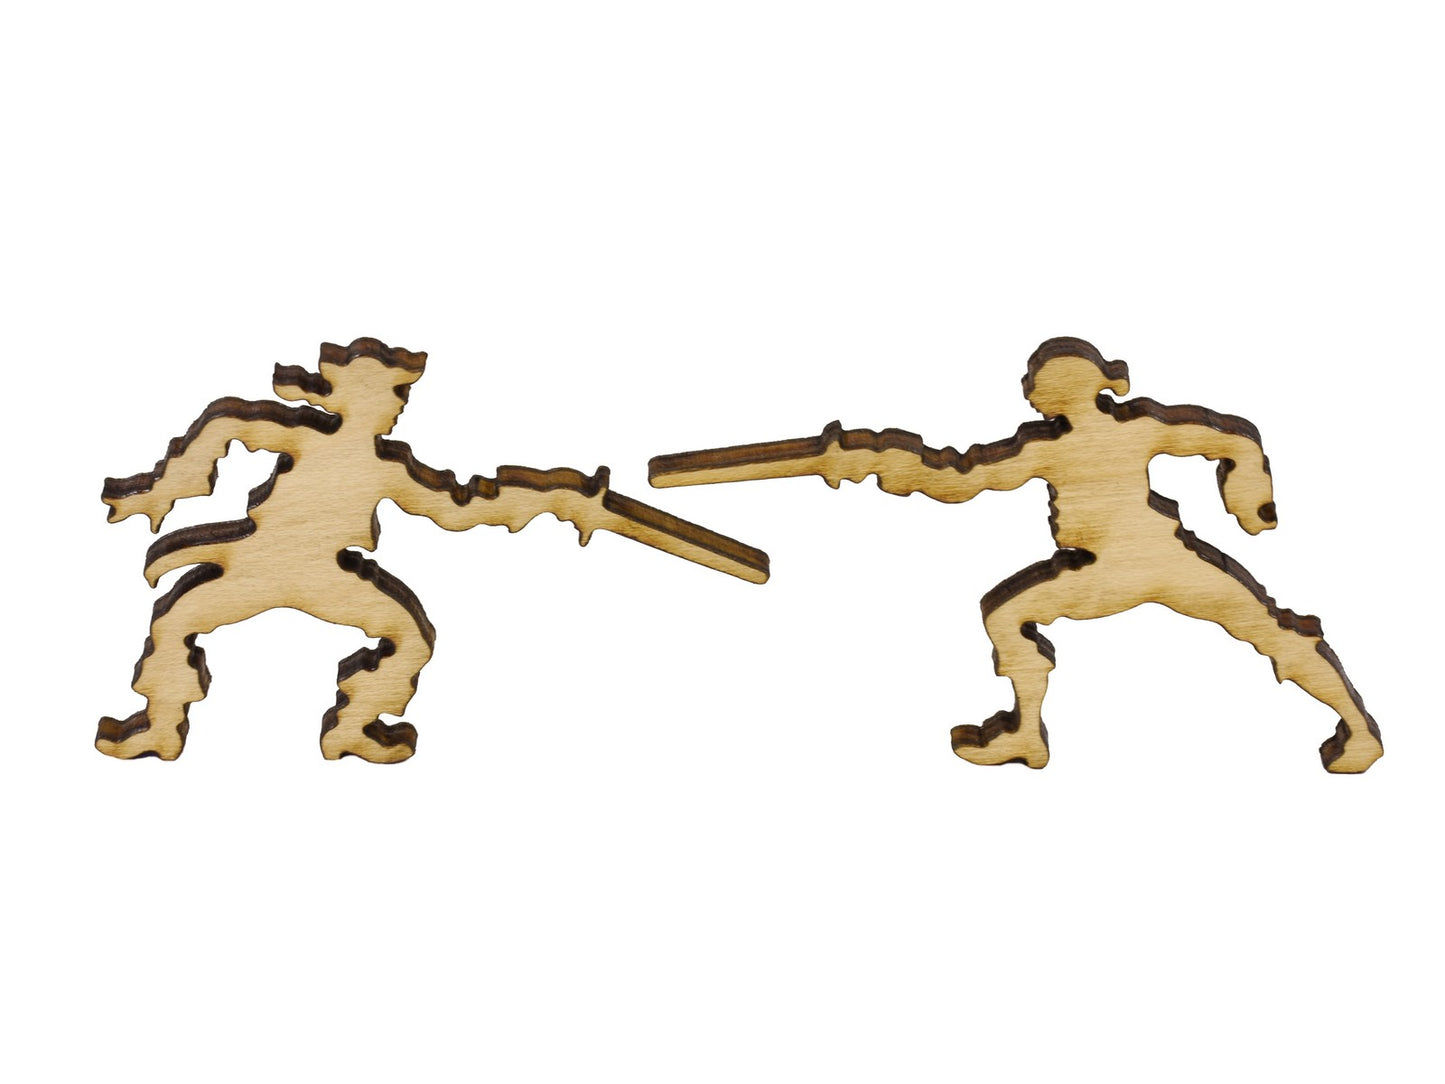 A closeup of pieces in the shape of two people fencing.